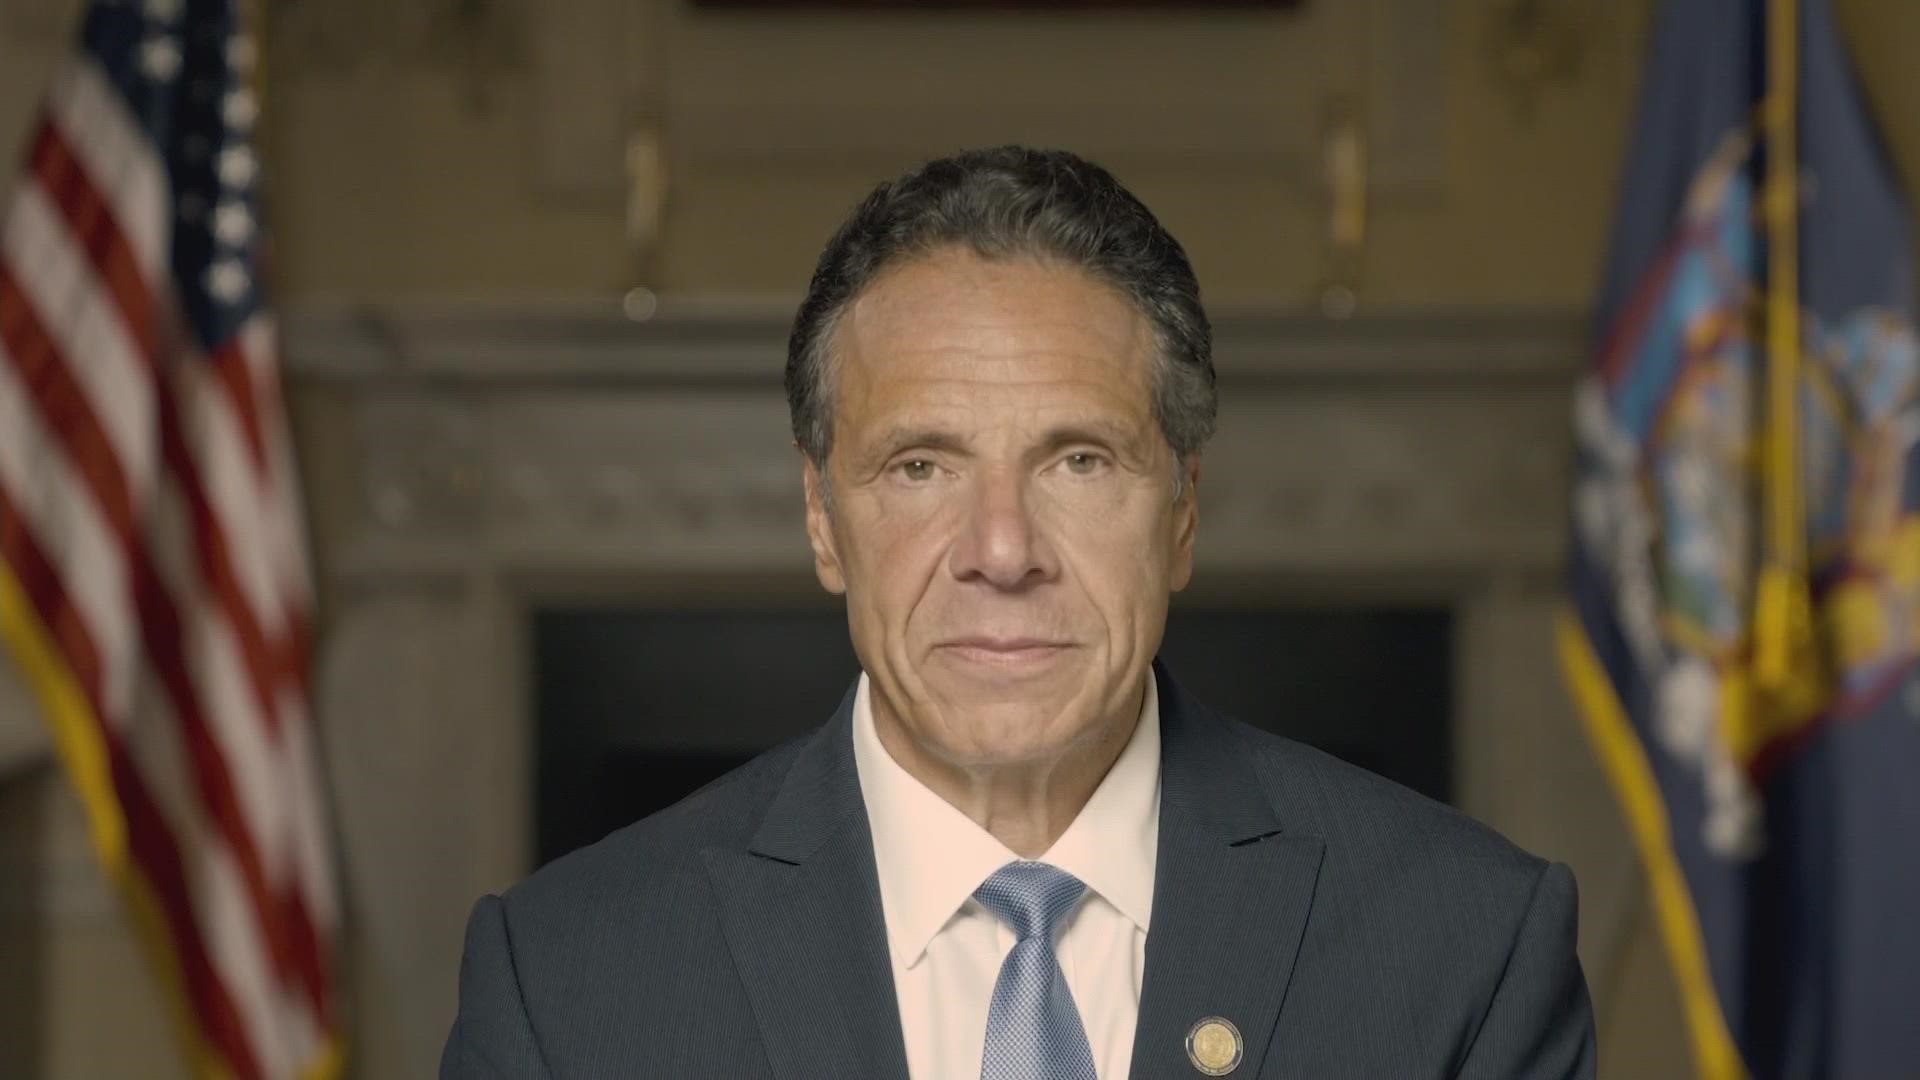 Independent investigators found that Gov. Andrew Cuomo sexually harassed multiple women.